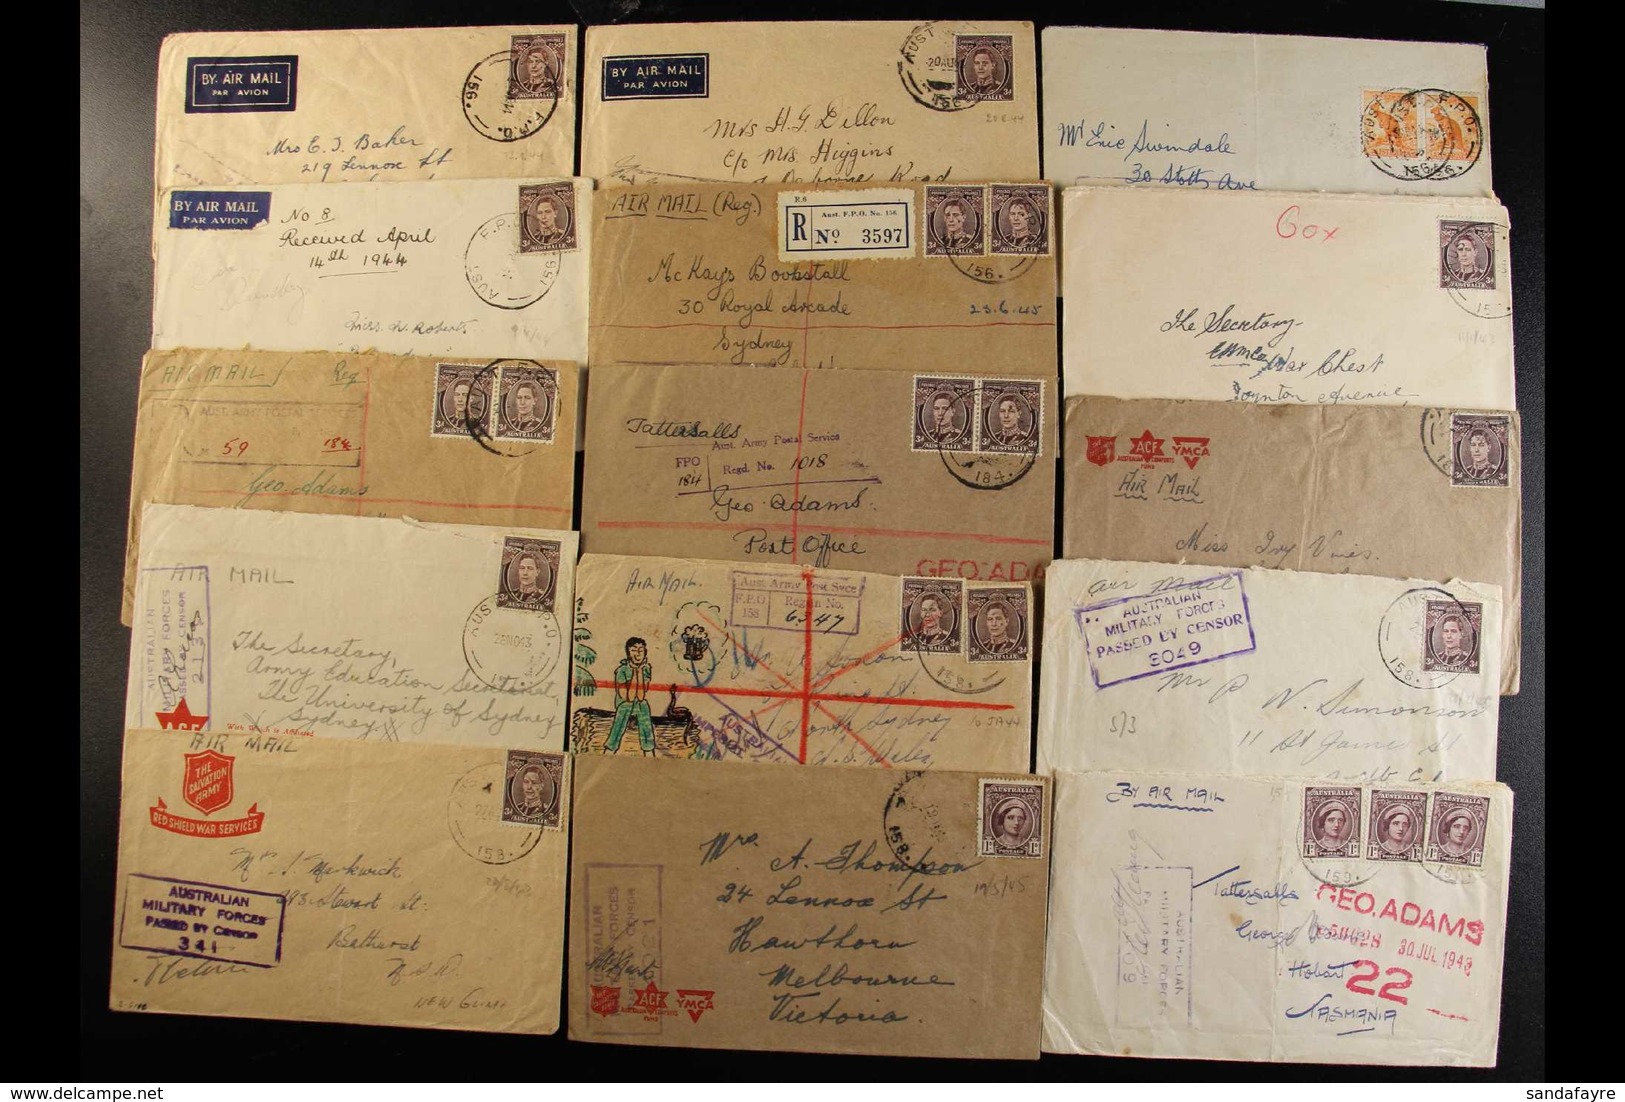 WW2 AUSTRALIAN FORCES - AUST F.P.O. DATESTAMPS A Fine Collection Of Covers Back To Australia, Or One To NZ, Bearing Aust - Papouasie-Nouvelle-Guinée